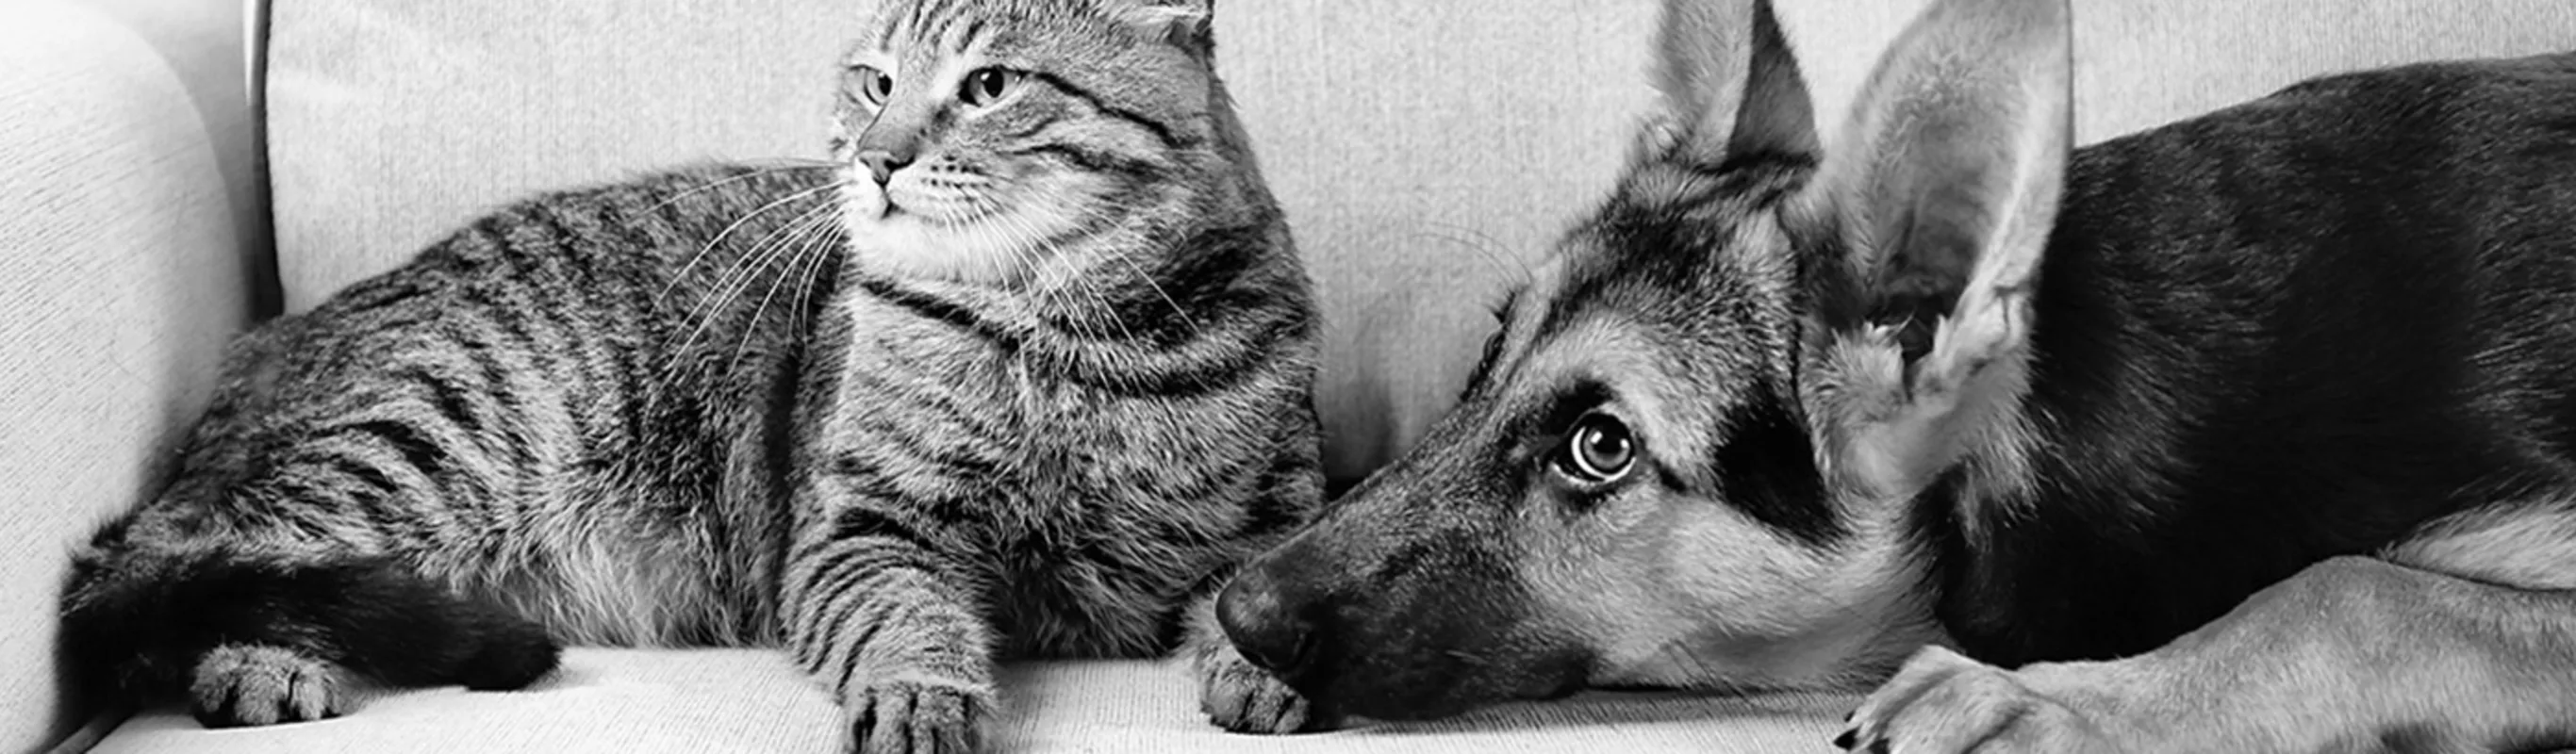 Black and white photo of a dog and cat laying on a couch